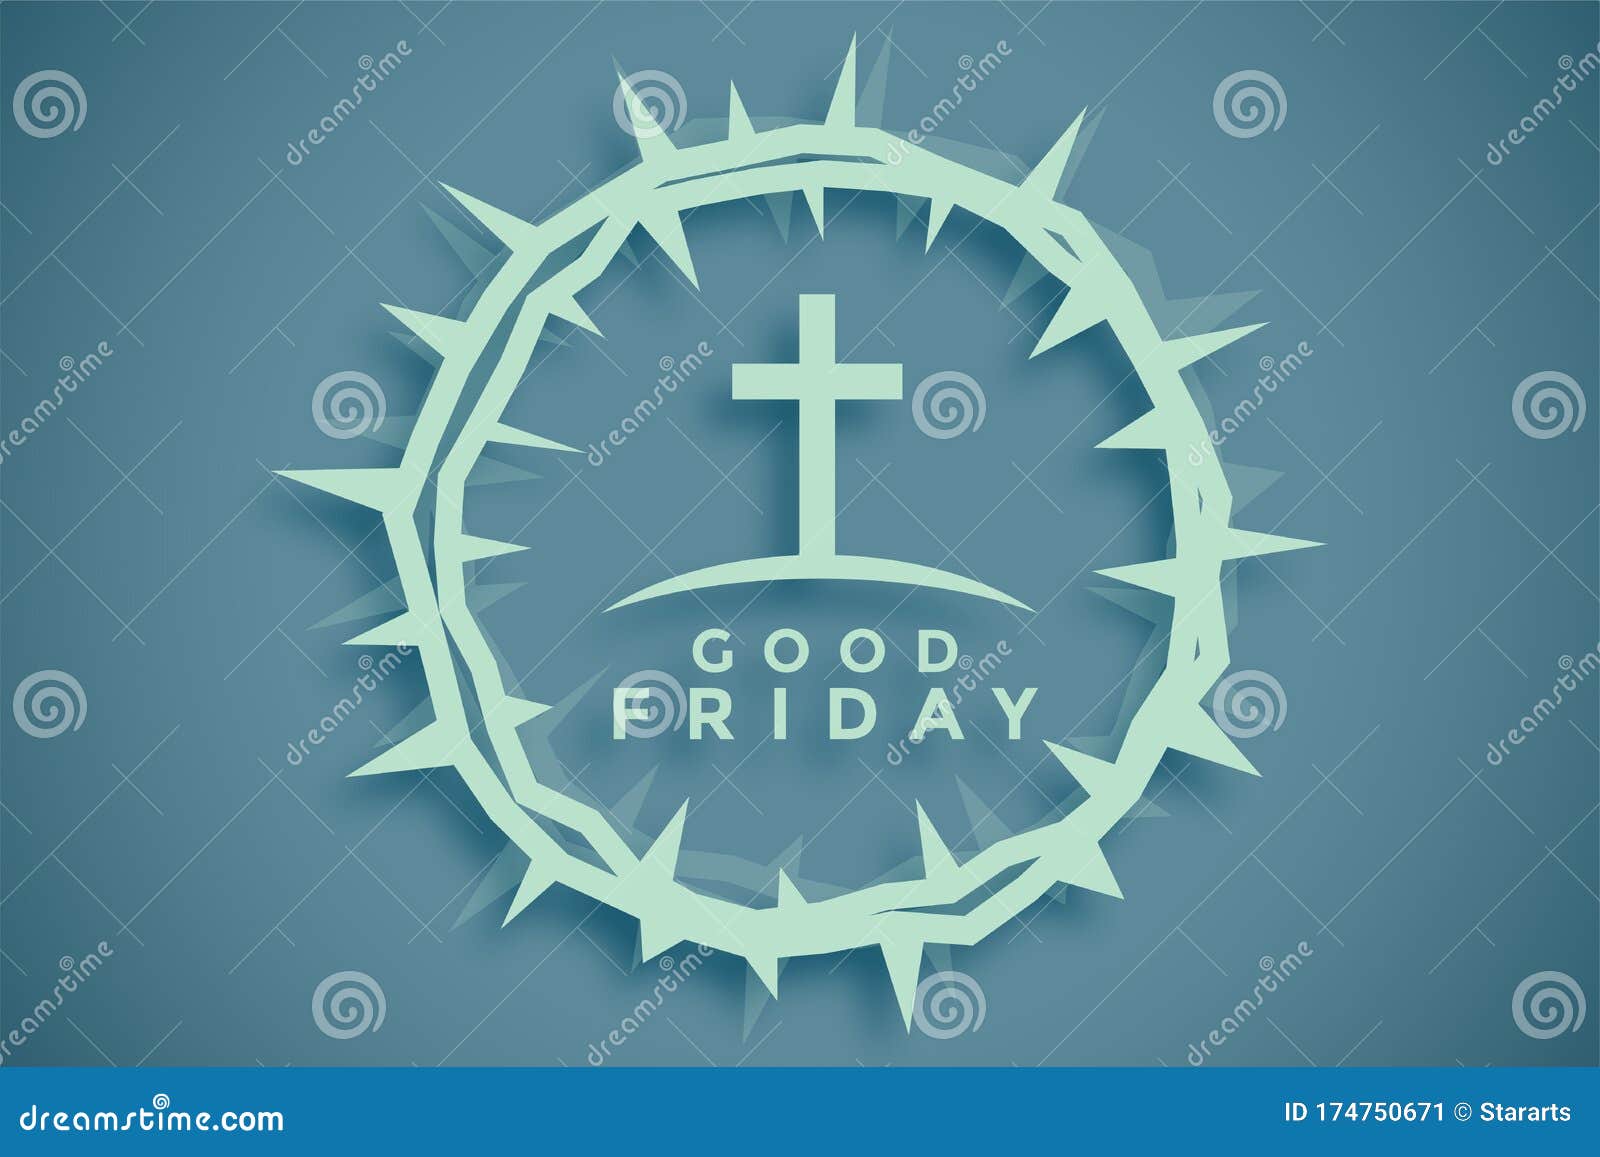 Crown of Thorns with Cross Good Friday Background Stock Vector -  Illustration of christ, celebration: 174750671